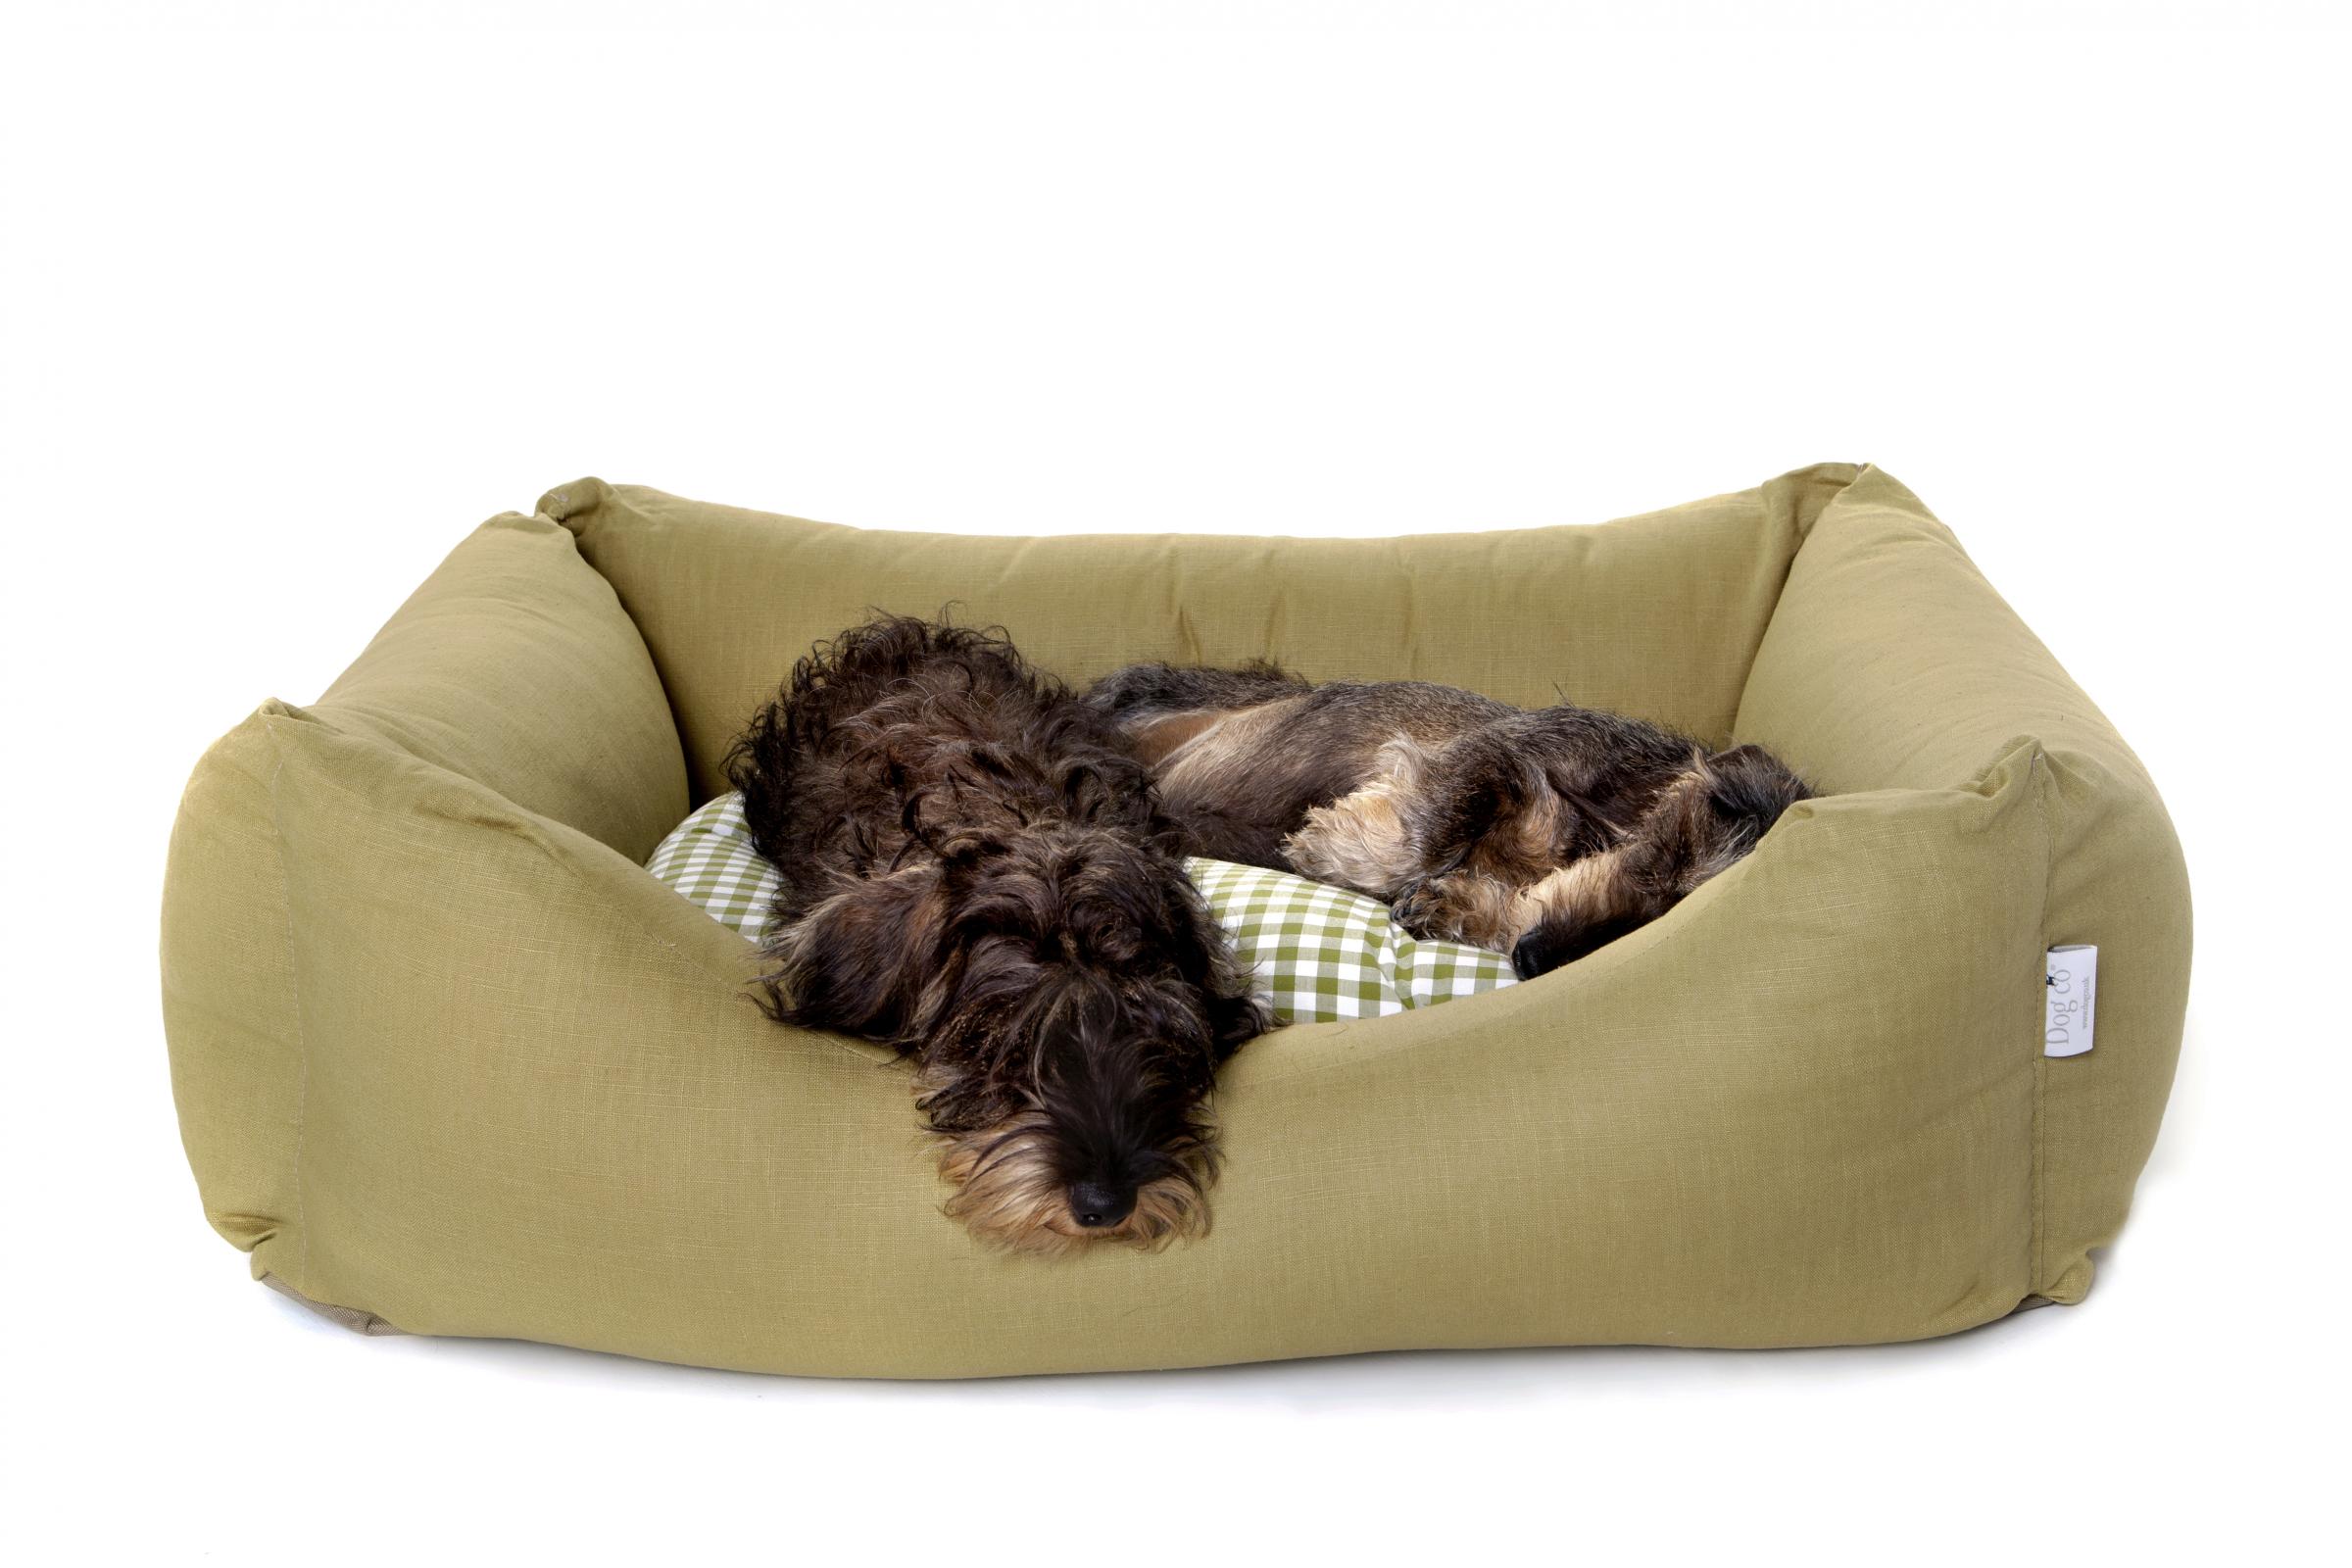 One of the products available from Dog Co.